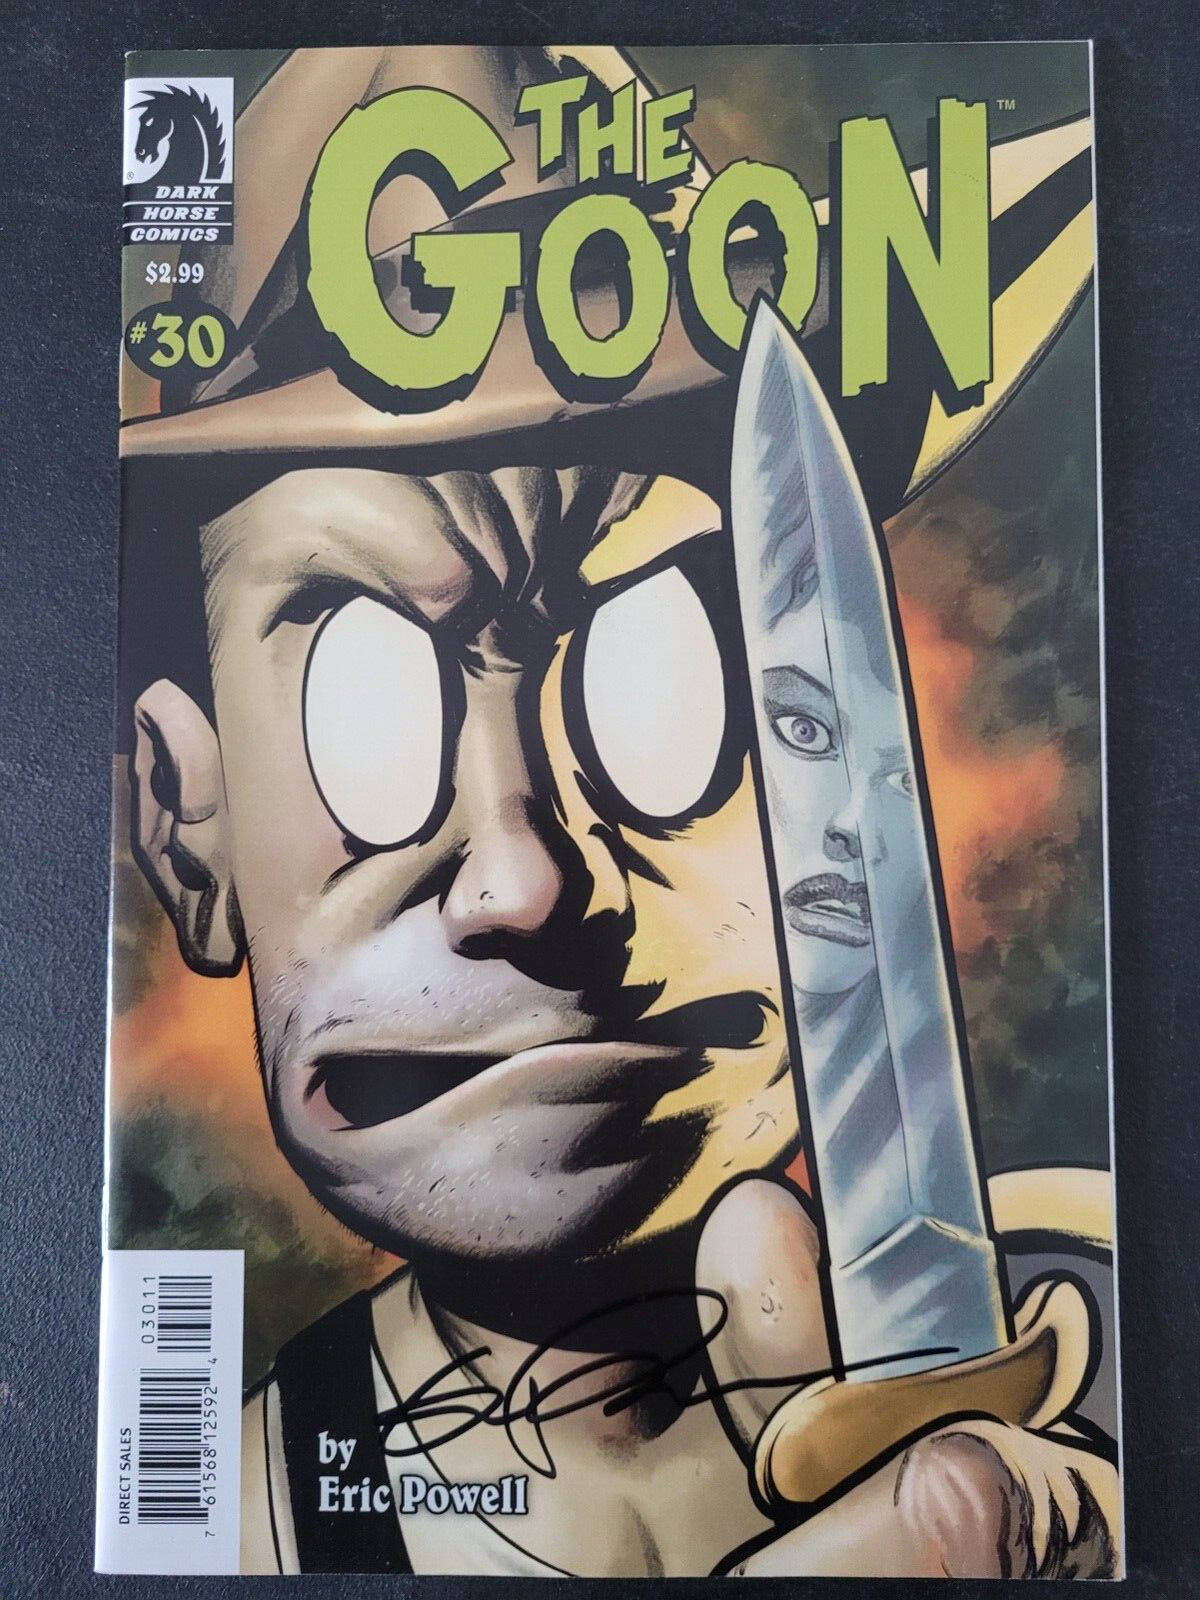 THE GOON #30 (2008) DARK HORSE COMICS AUTOGRAPHED/SIGNED By ERIC POWELL